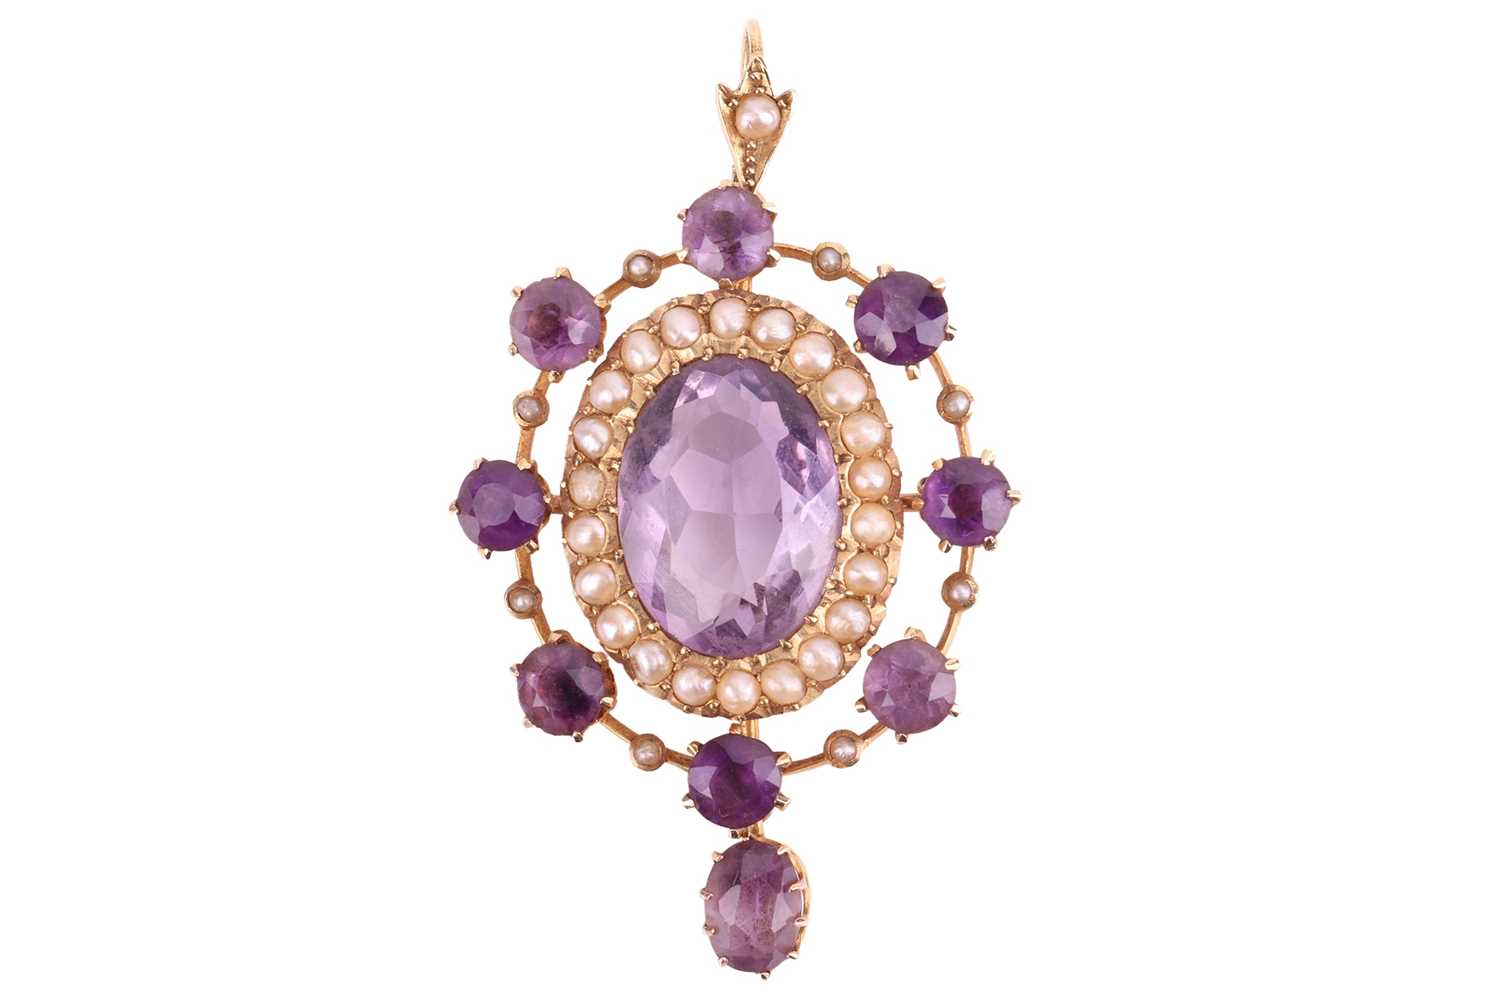 An Edwardian amethyst and seed pearl pendant, the central oval amethyst measuring approximately 13.5